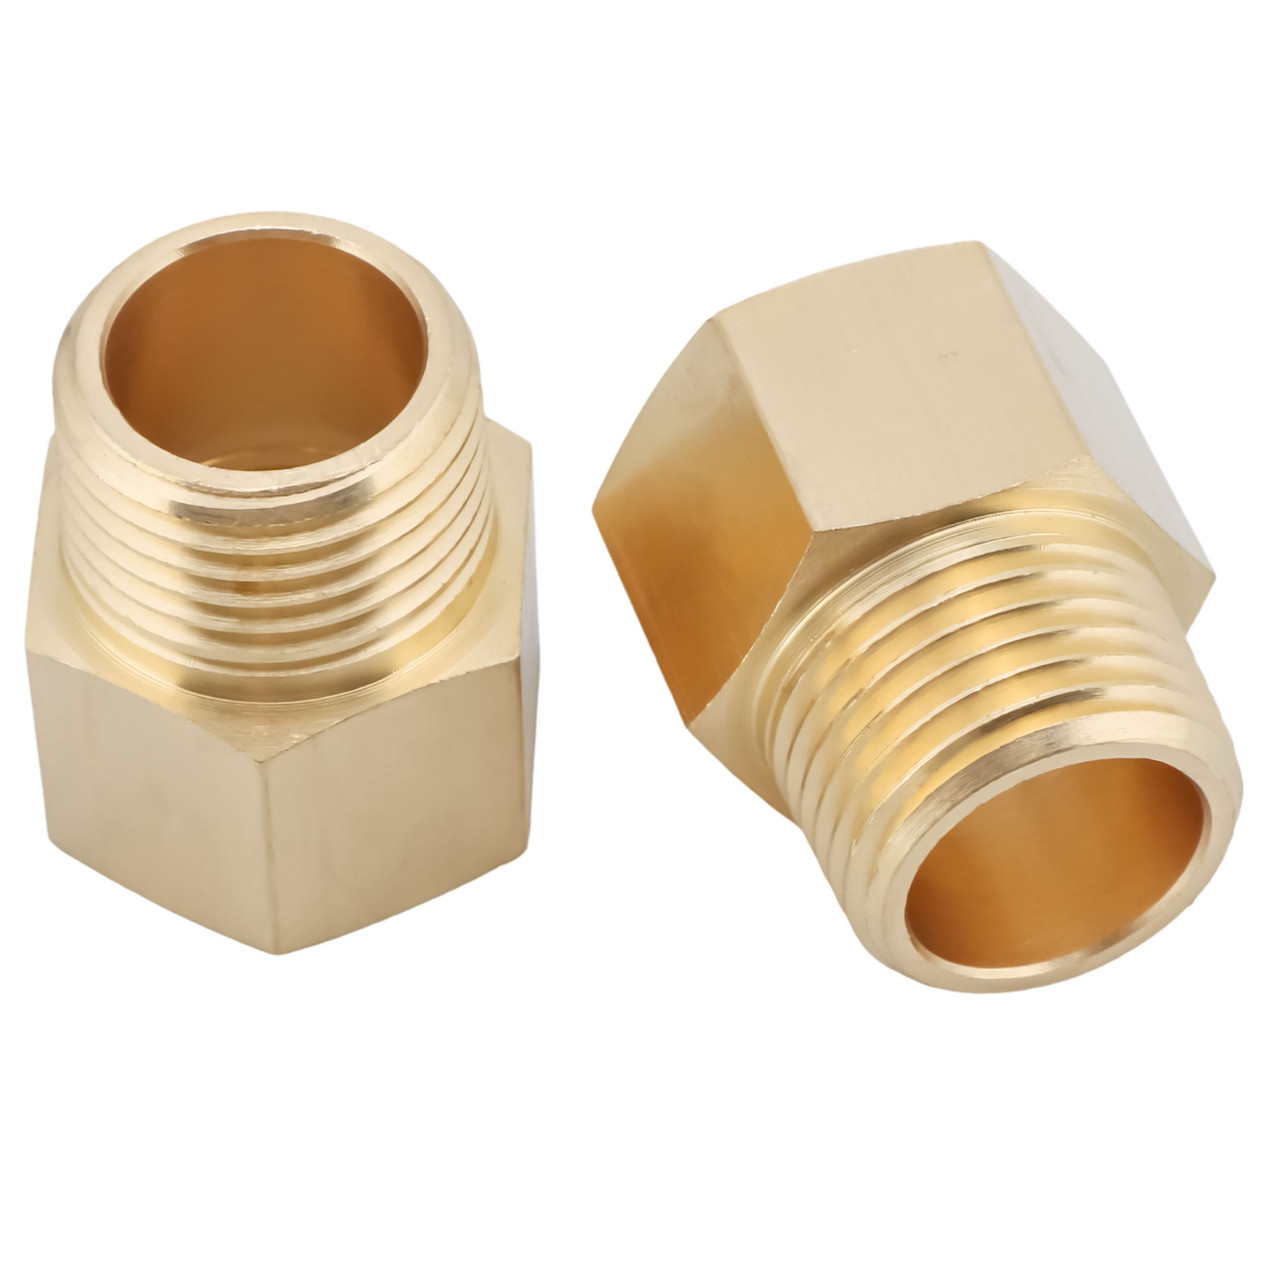 Brass Coupling Brass Pipe Fitting Brass Reducer Coupling 1/2 inch Female x  3/4 inch Female